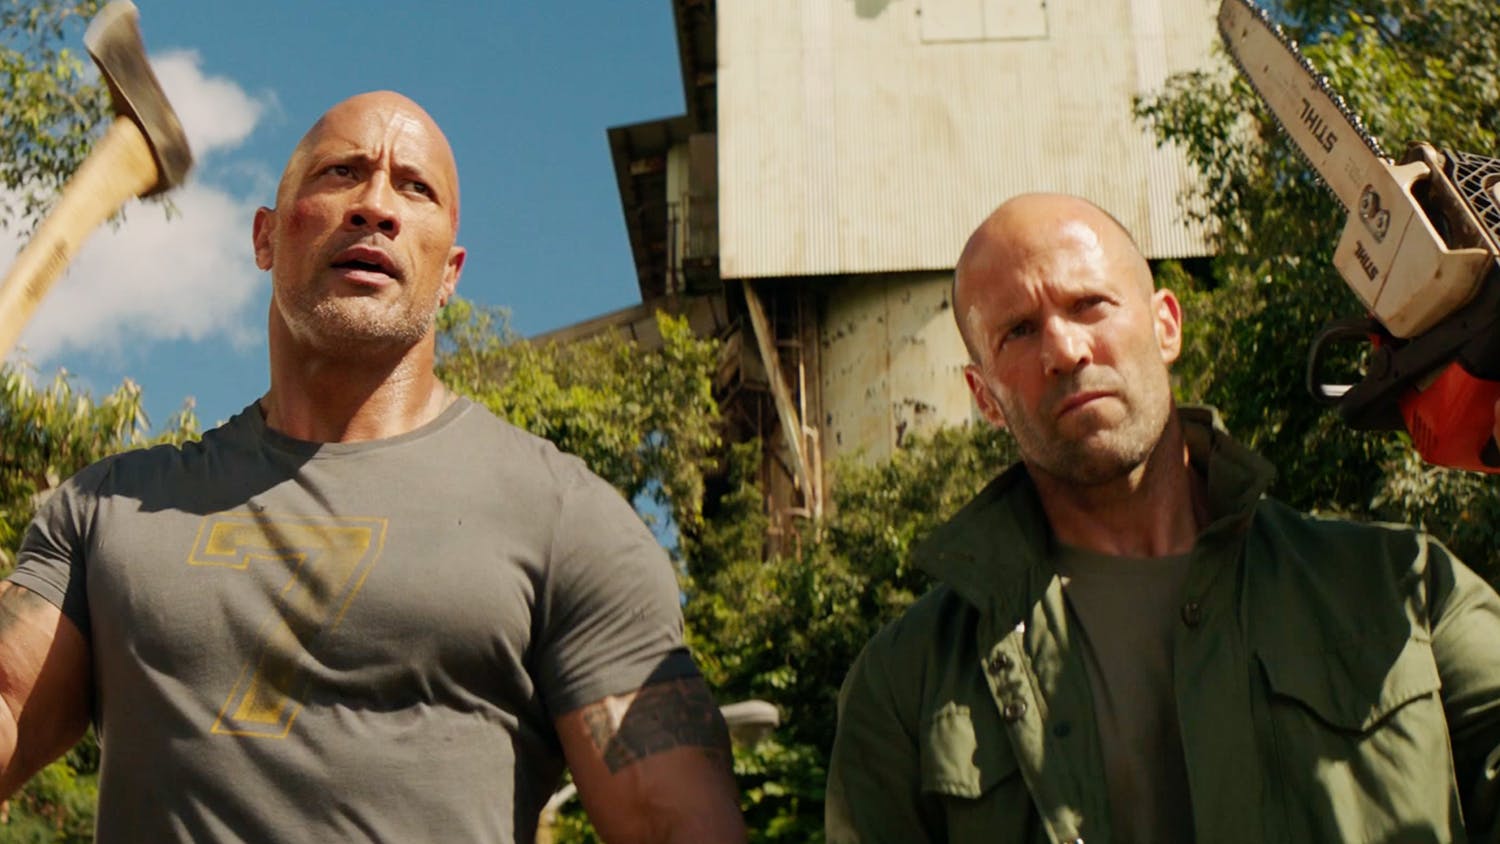 Hobbs & Shaw: 13 Things We Learned From Director David Leitch